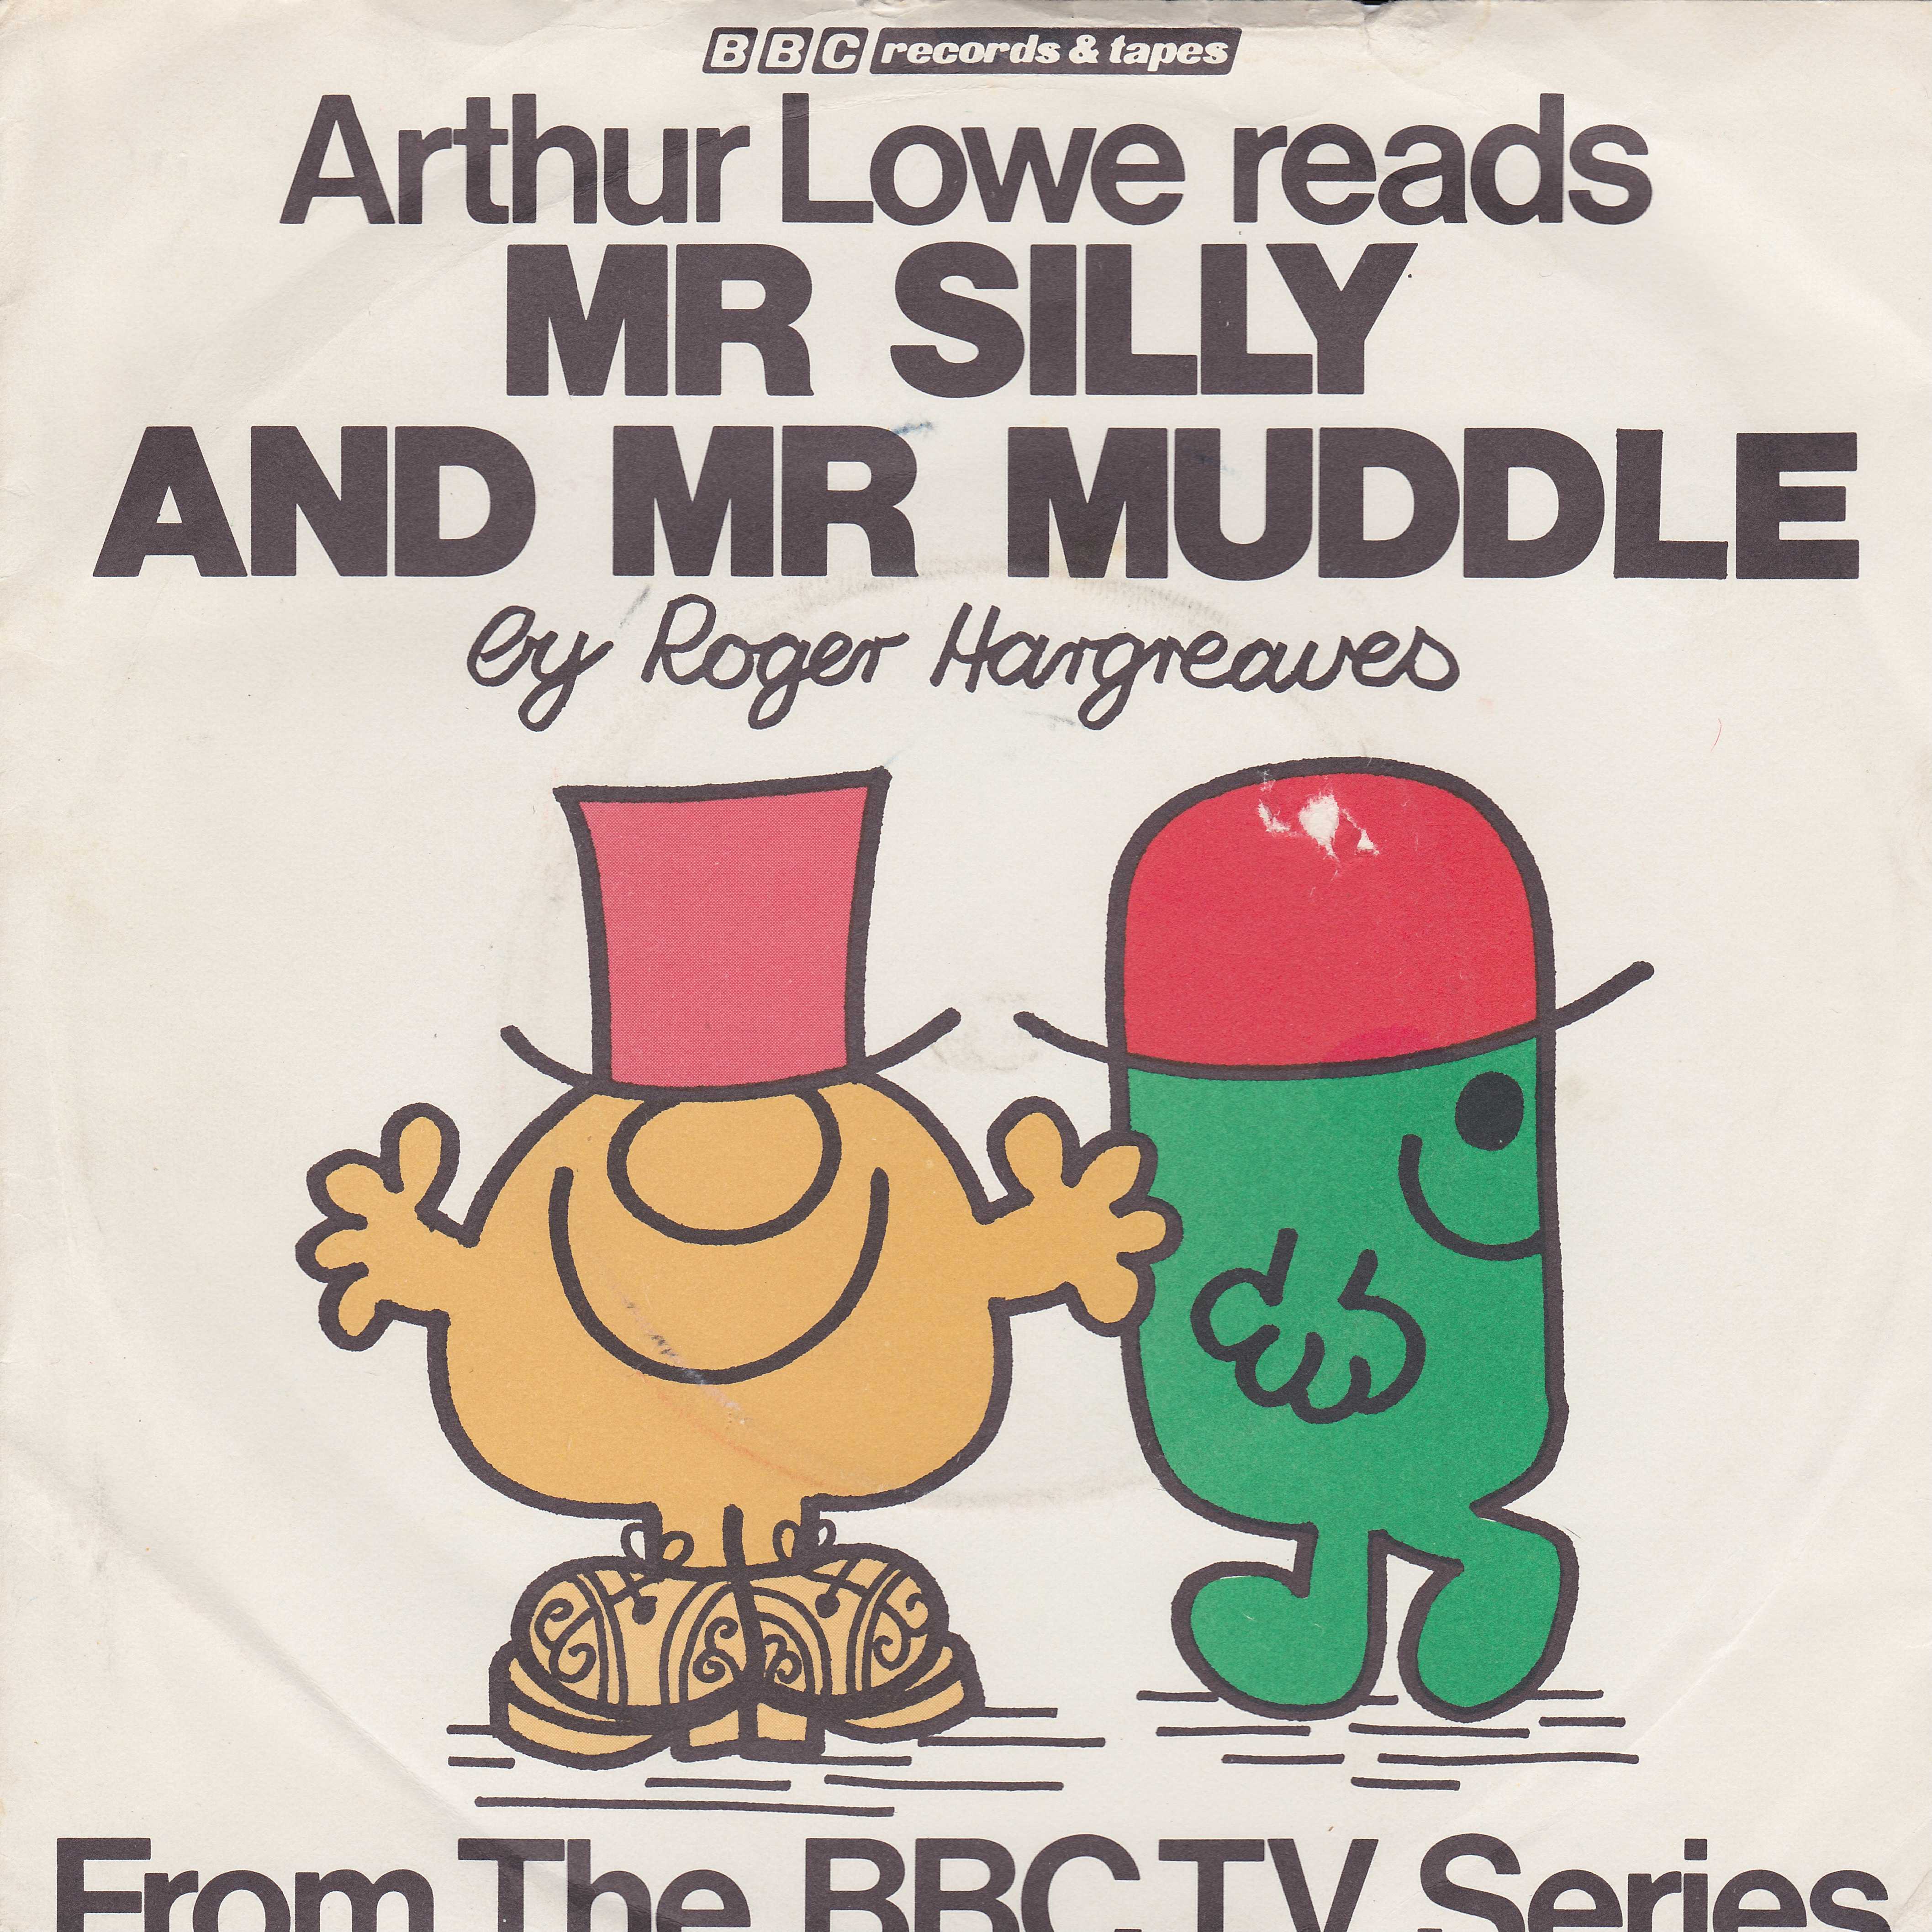 Picture of RESL 41 Mr Men - Mr Silly by artist Roger Hargreaves from the BBC records and Tapes library